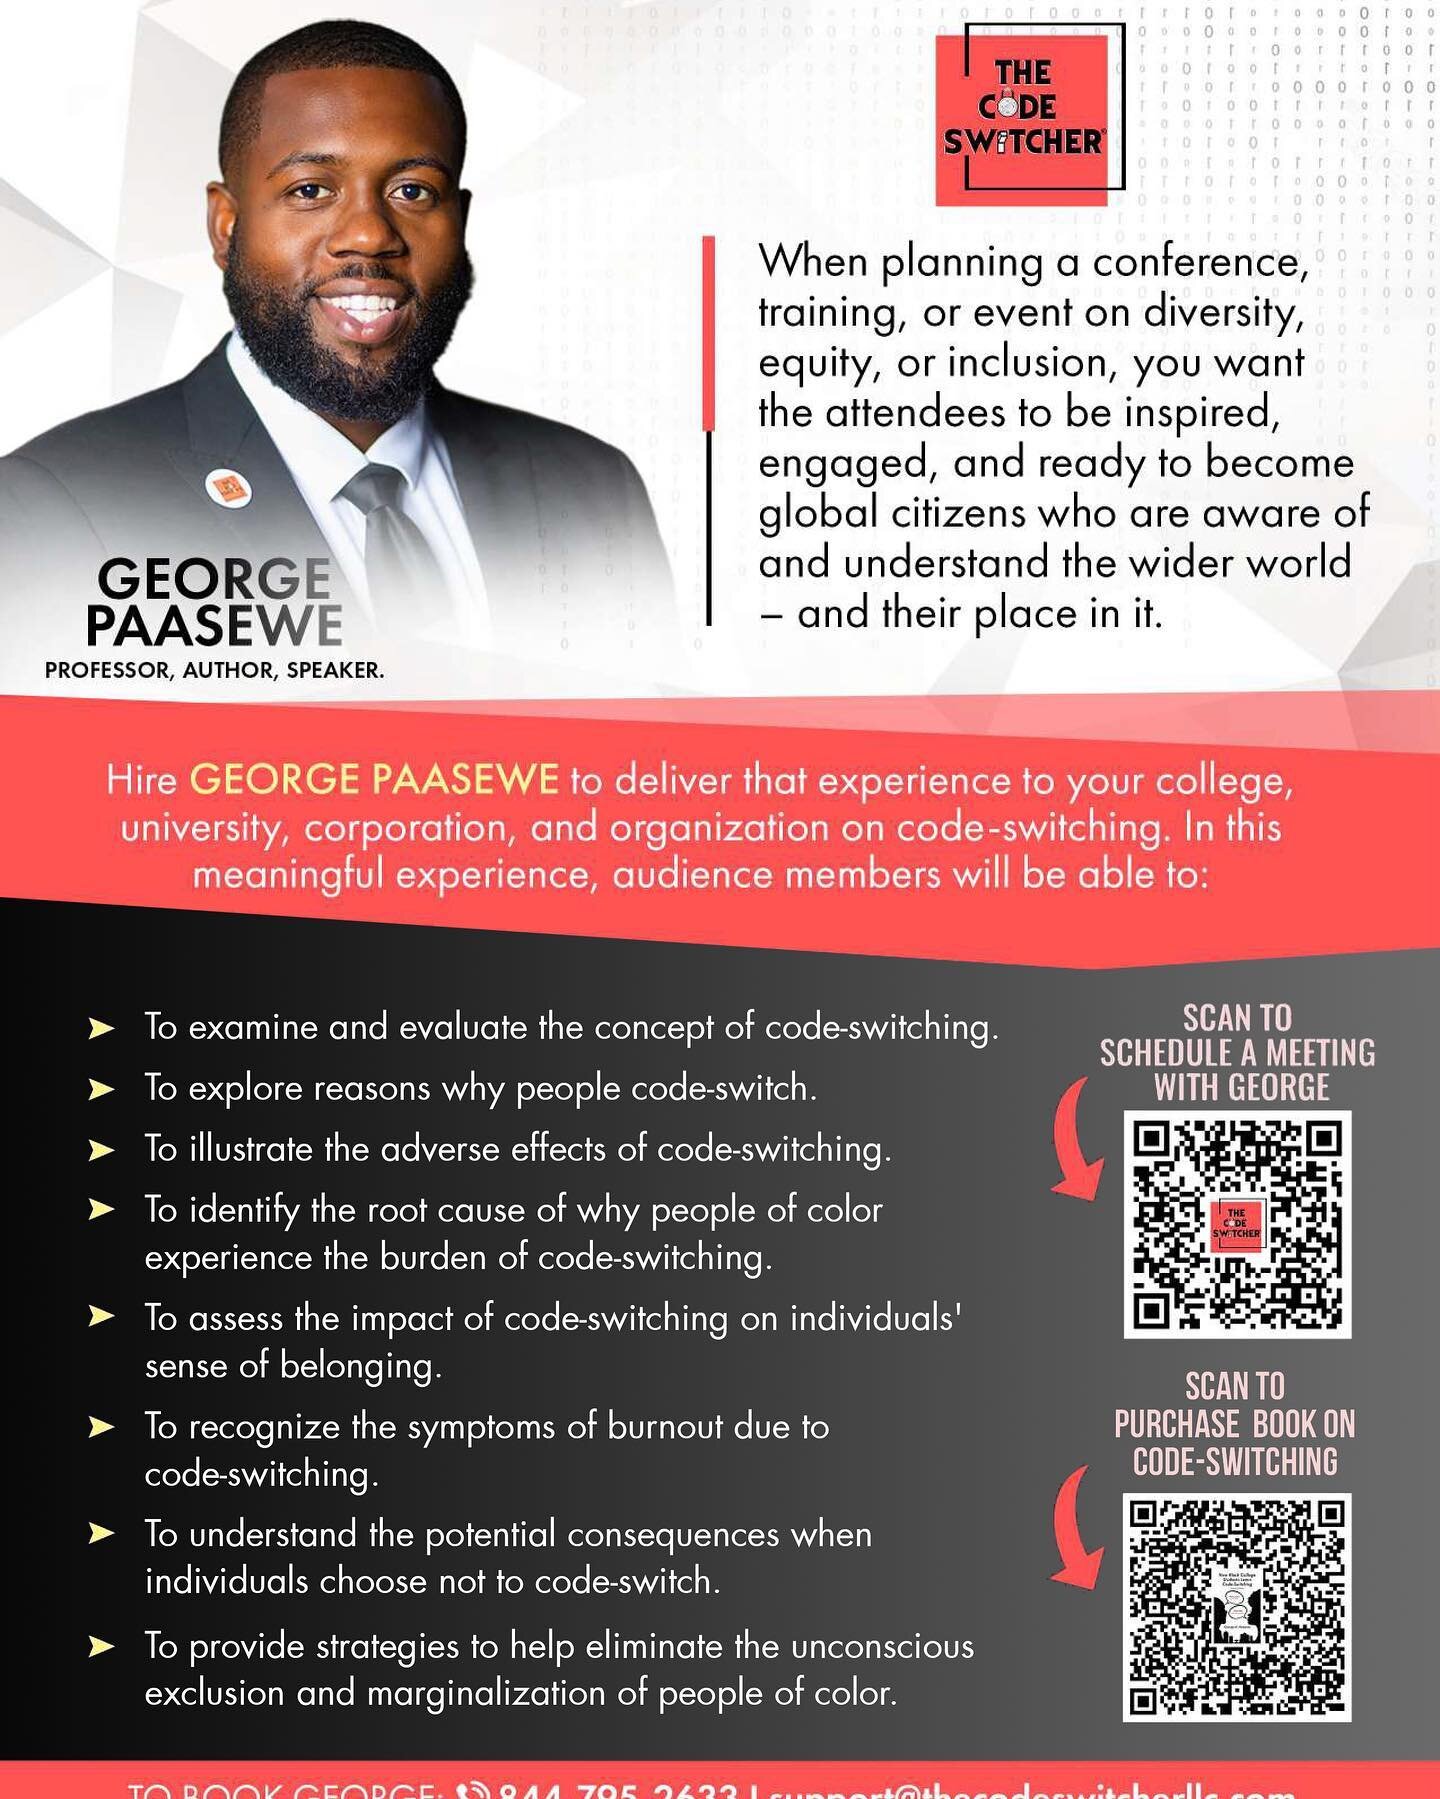 We help institutions increase their attraction, retention, and graduate rates of multicultural students through education on code-switching and it&rsquo;s adverse effects. 

#georgepaasewe 
#thecodeswitcher 
#diversitytraining 
#diversityandinclusion